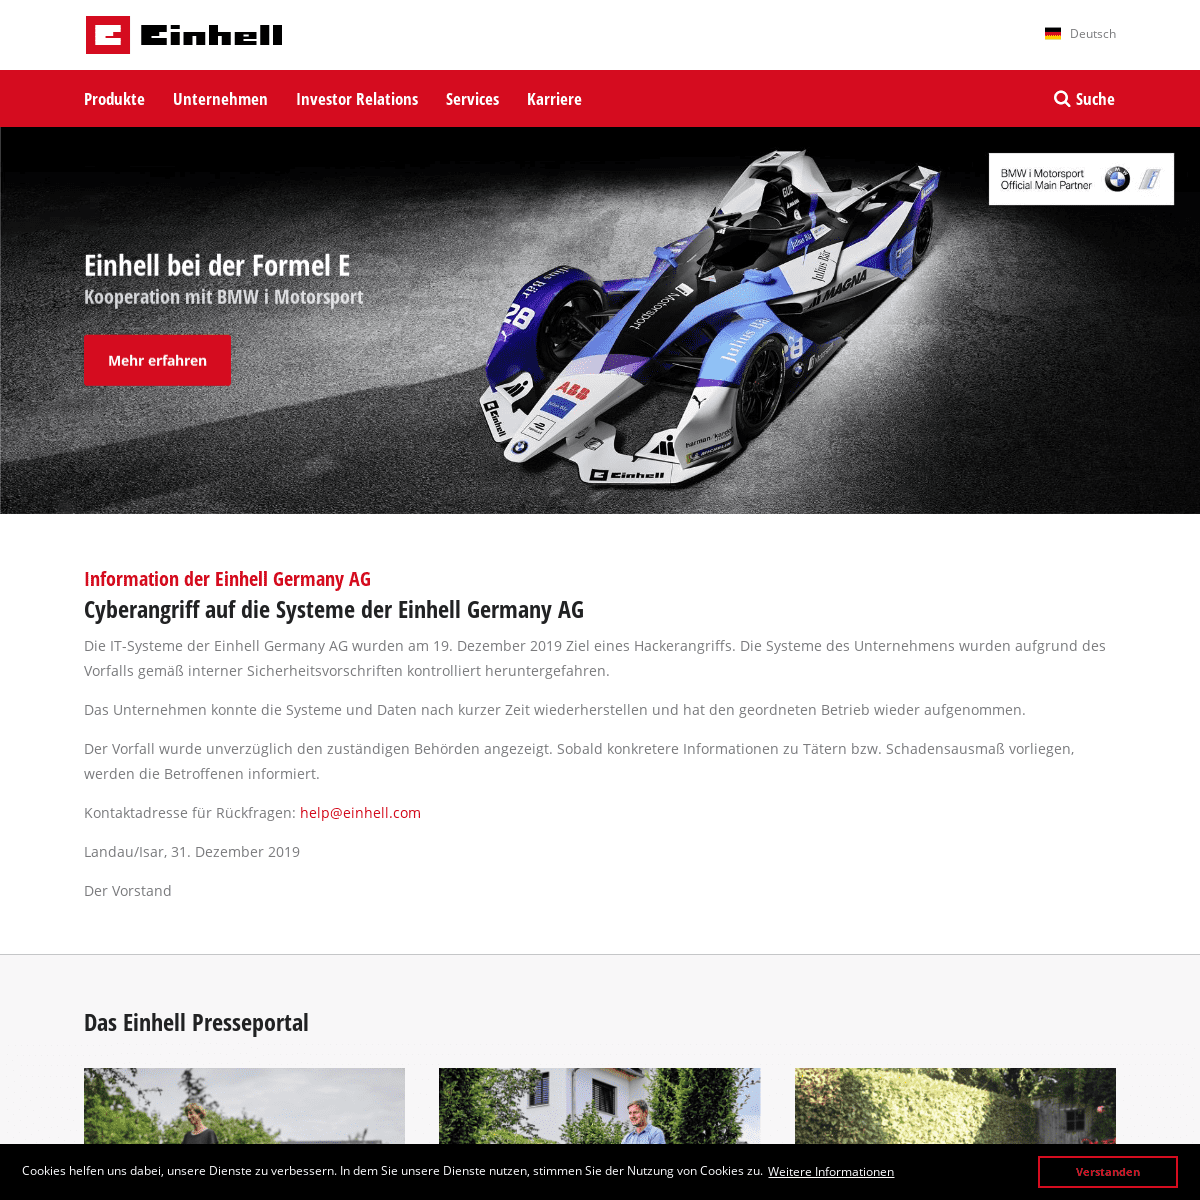 A complete backup of einhell.com